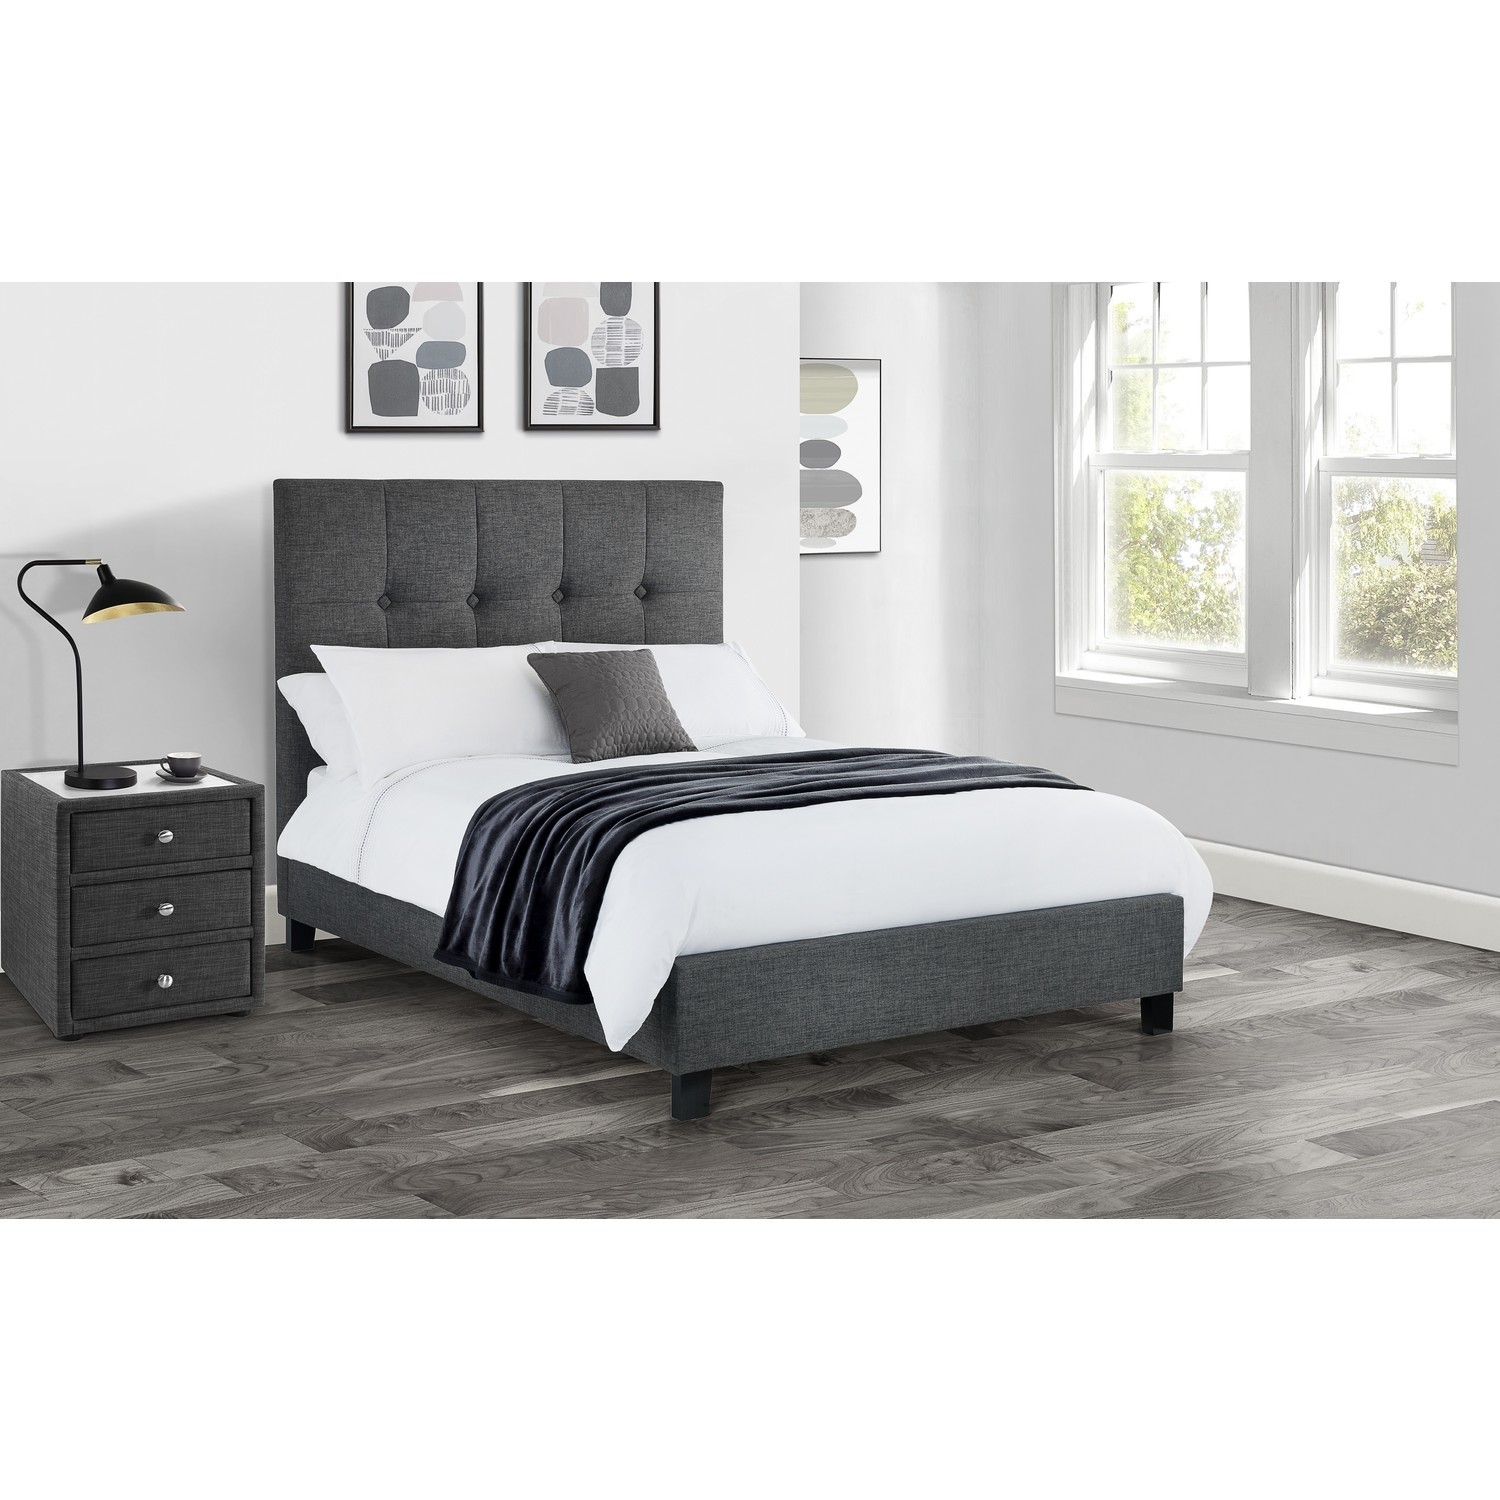 Dark Grey Super King Size Bed Frame, High King Size Bed Frame With Headboard